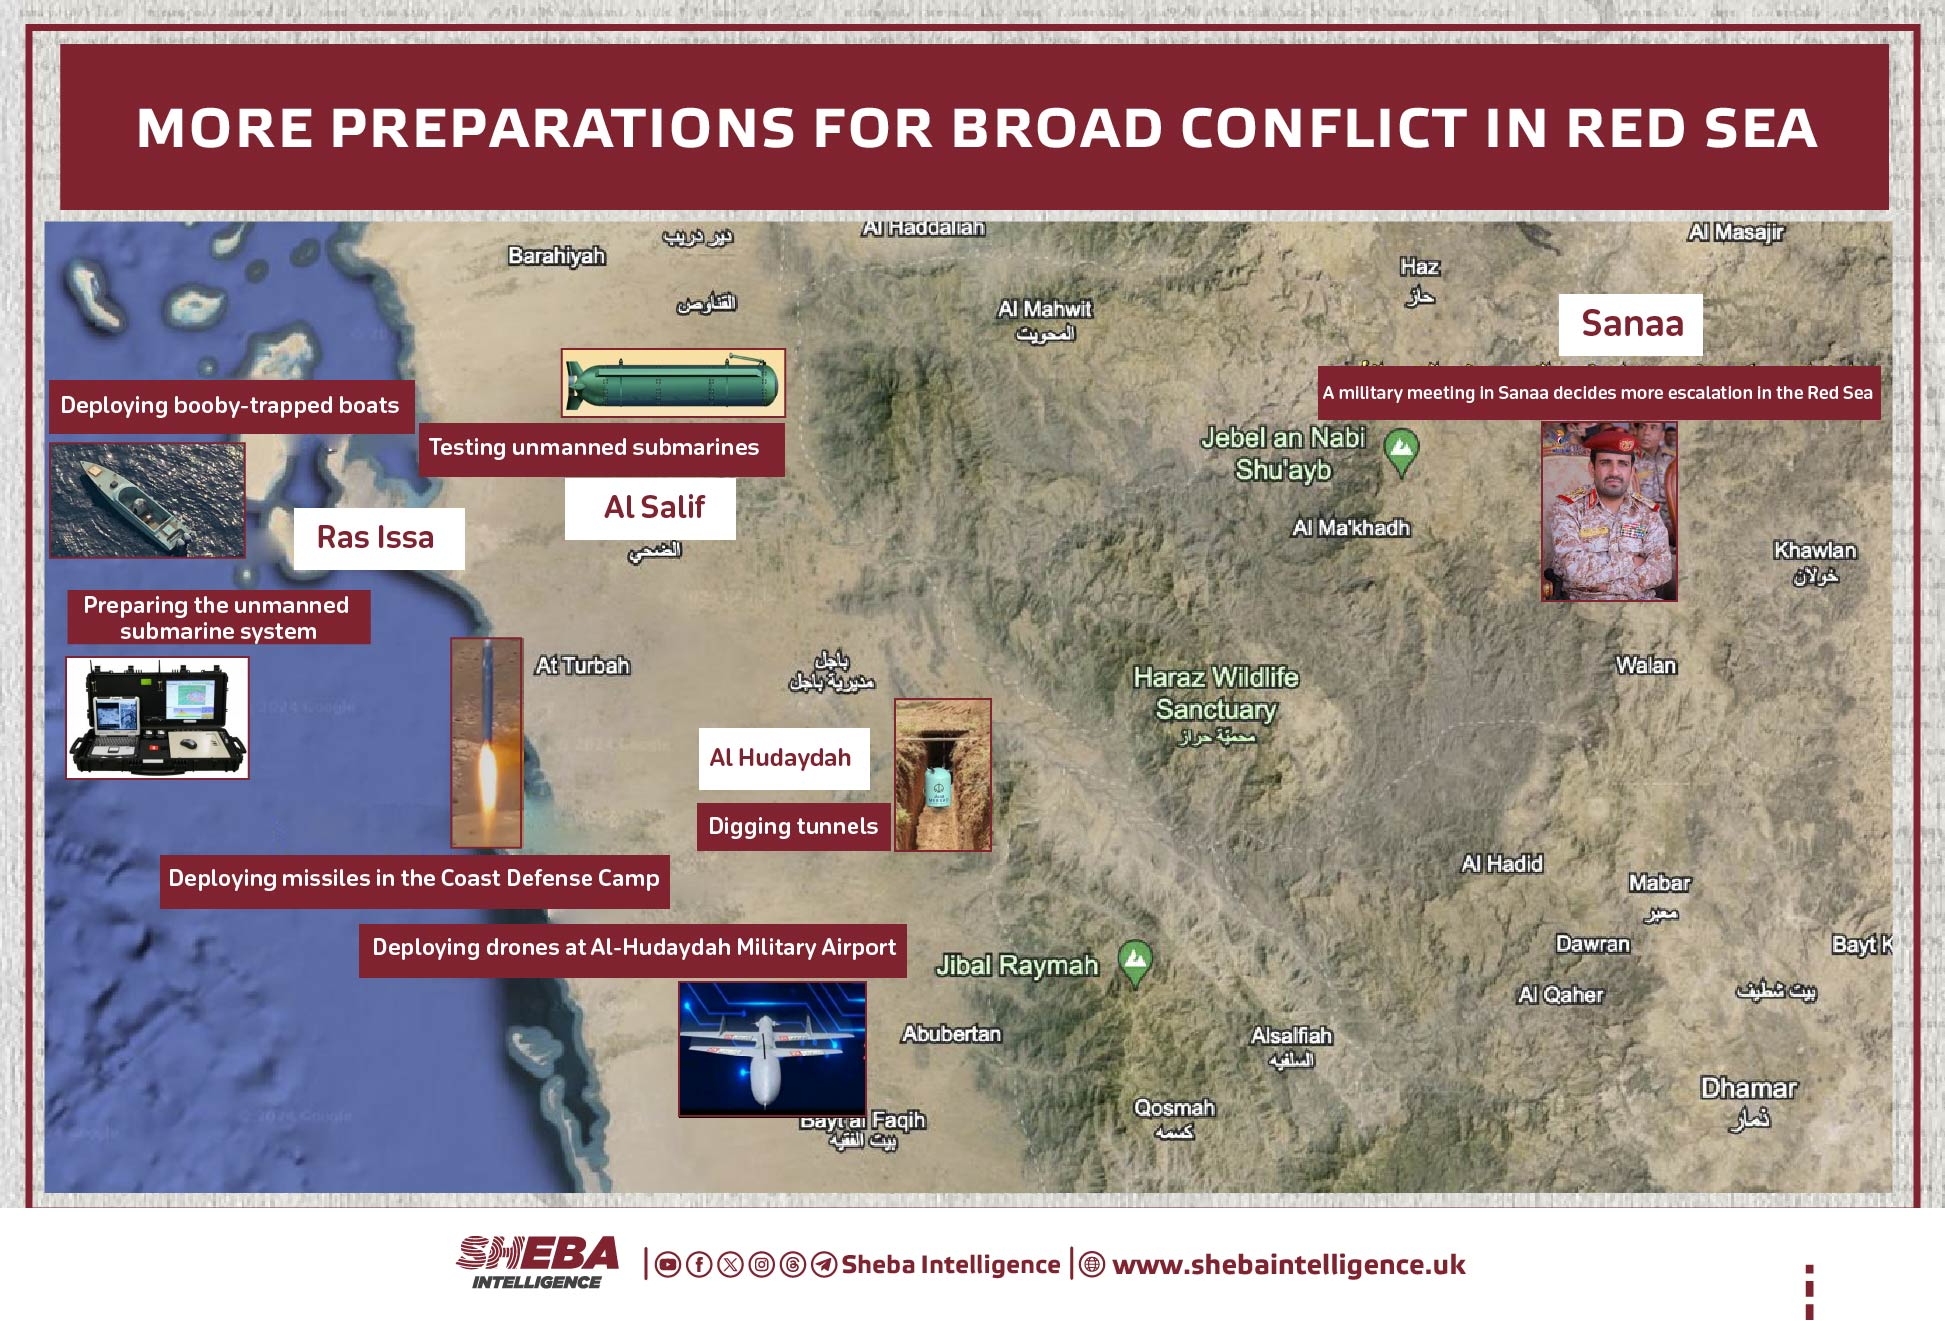 More Preparations for Broad Conflict in Red Sea